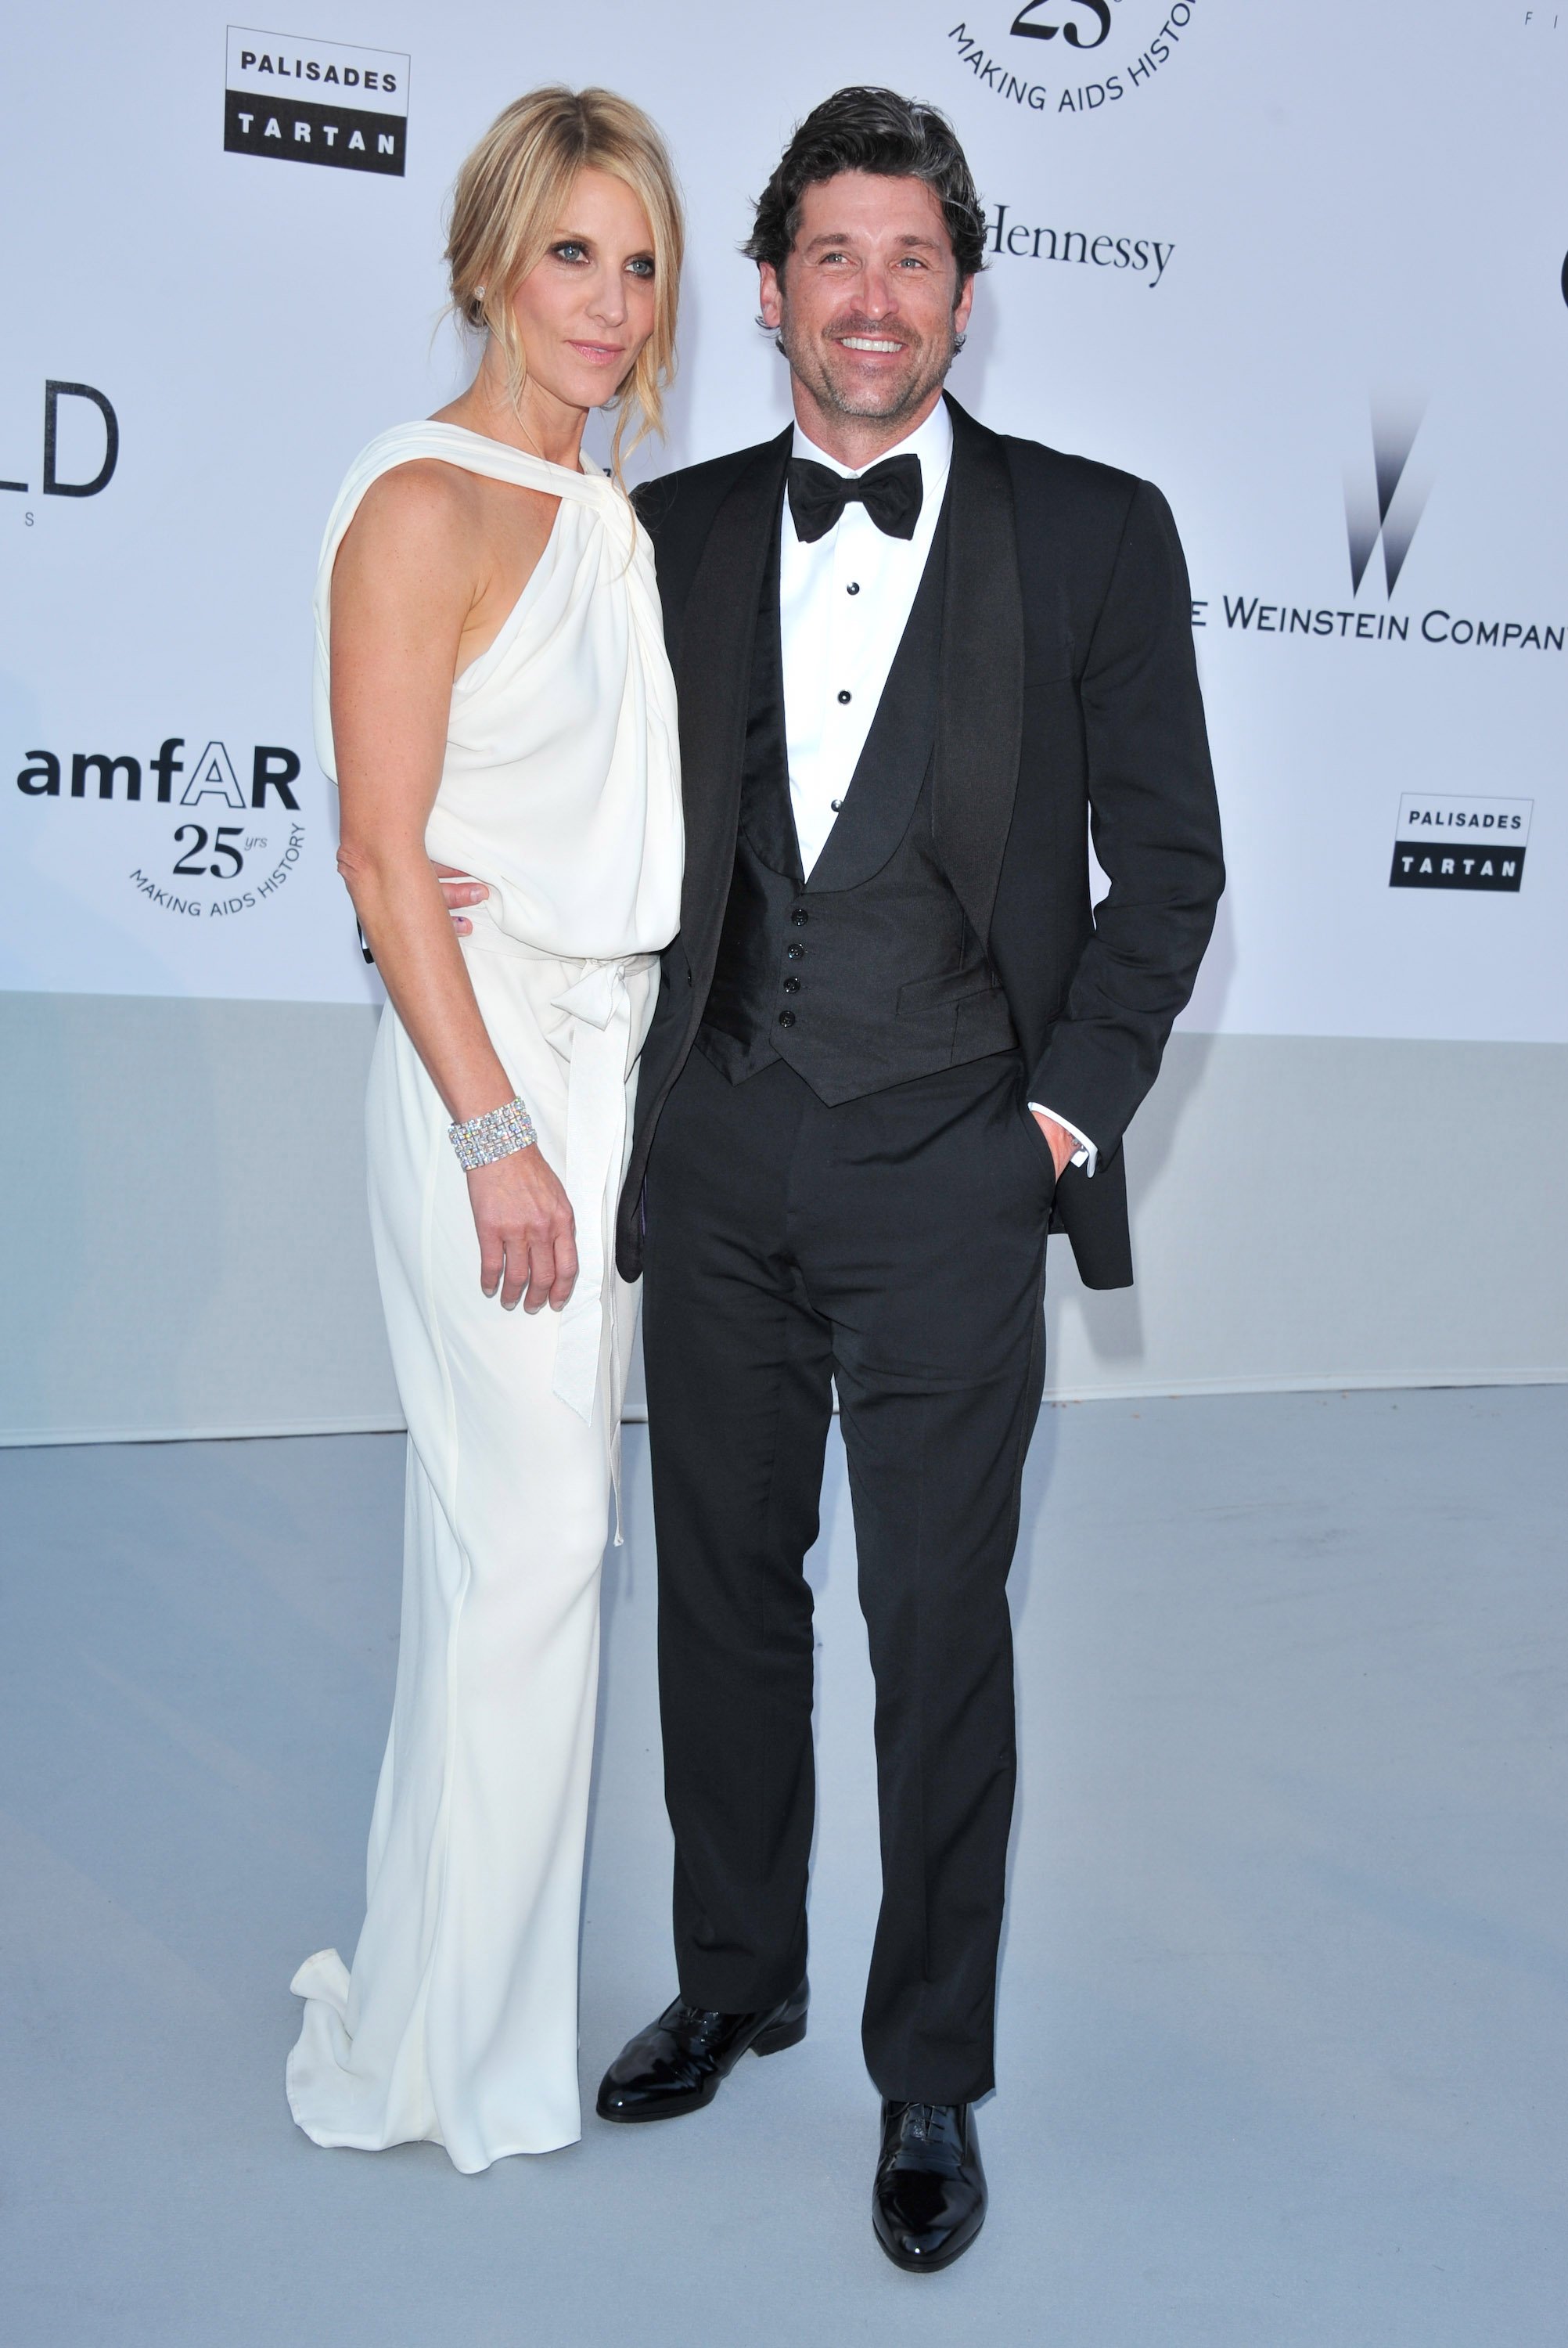 Jillian Dempsey and Patrick Dempsey attend amfAR's Cinema Against AIDS Gala at Hotel Du Cap on May 19, 2011 in Antibes, France | Source: Getty Images